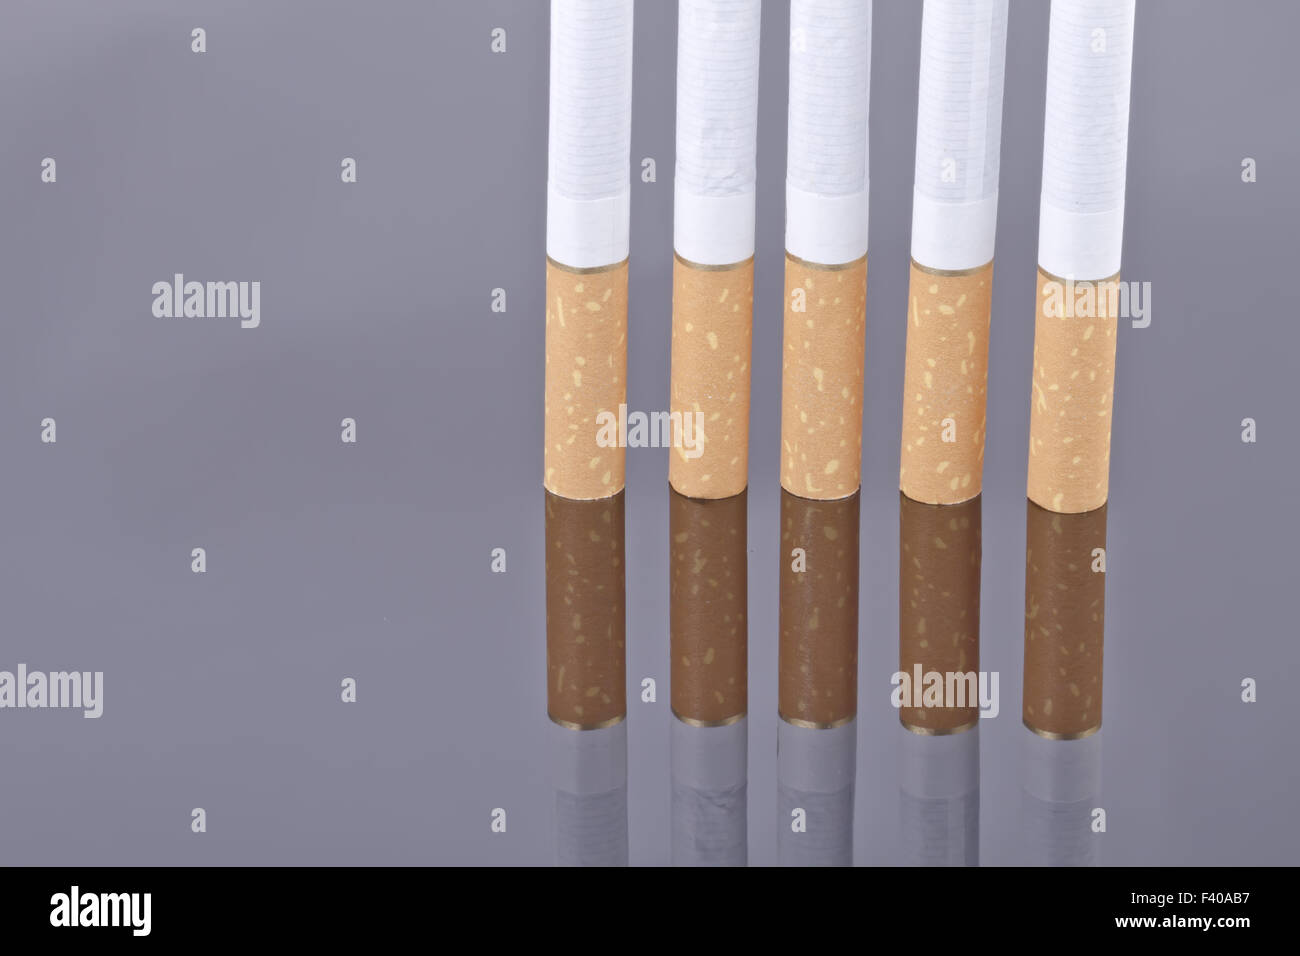 Cigarette on a reflective surface Stock Photo